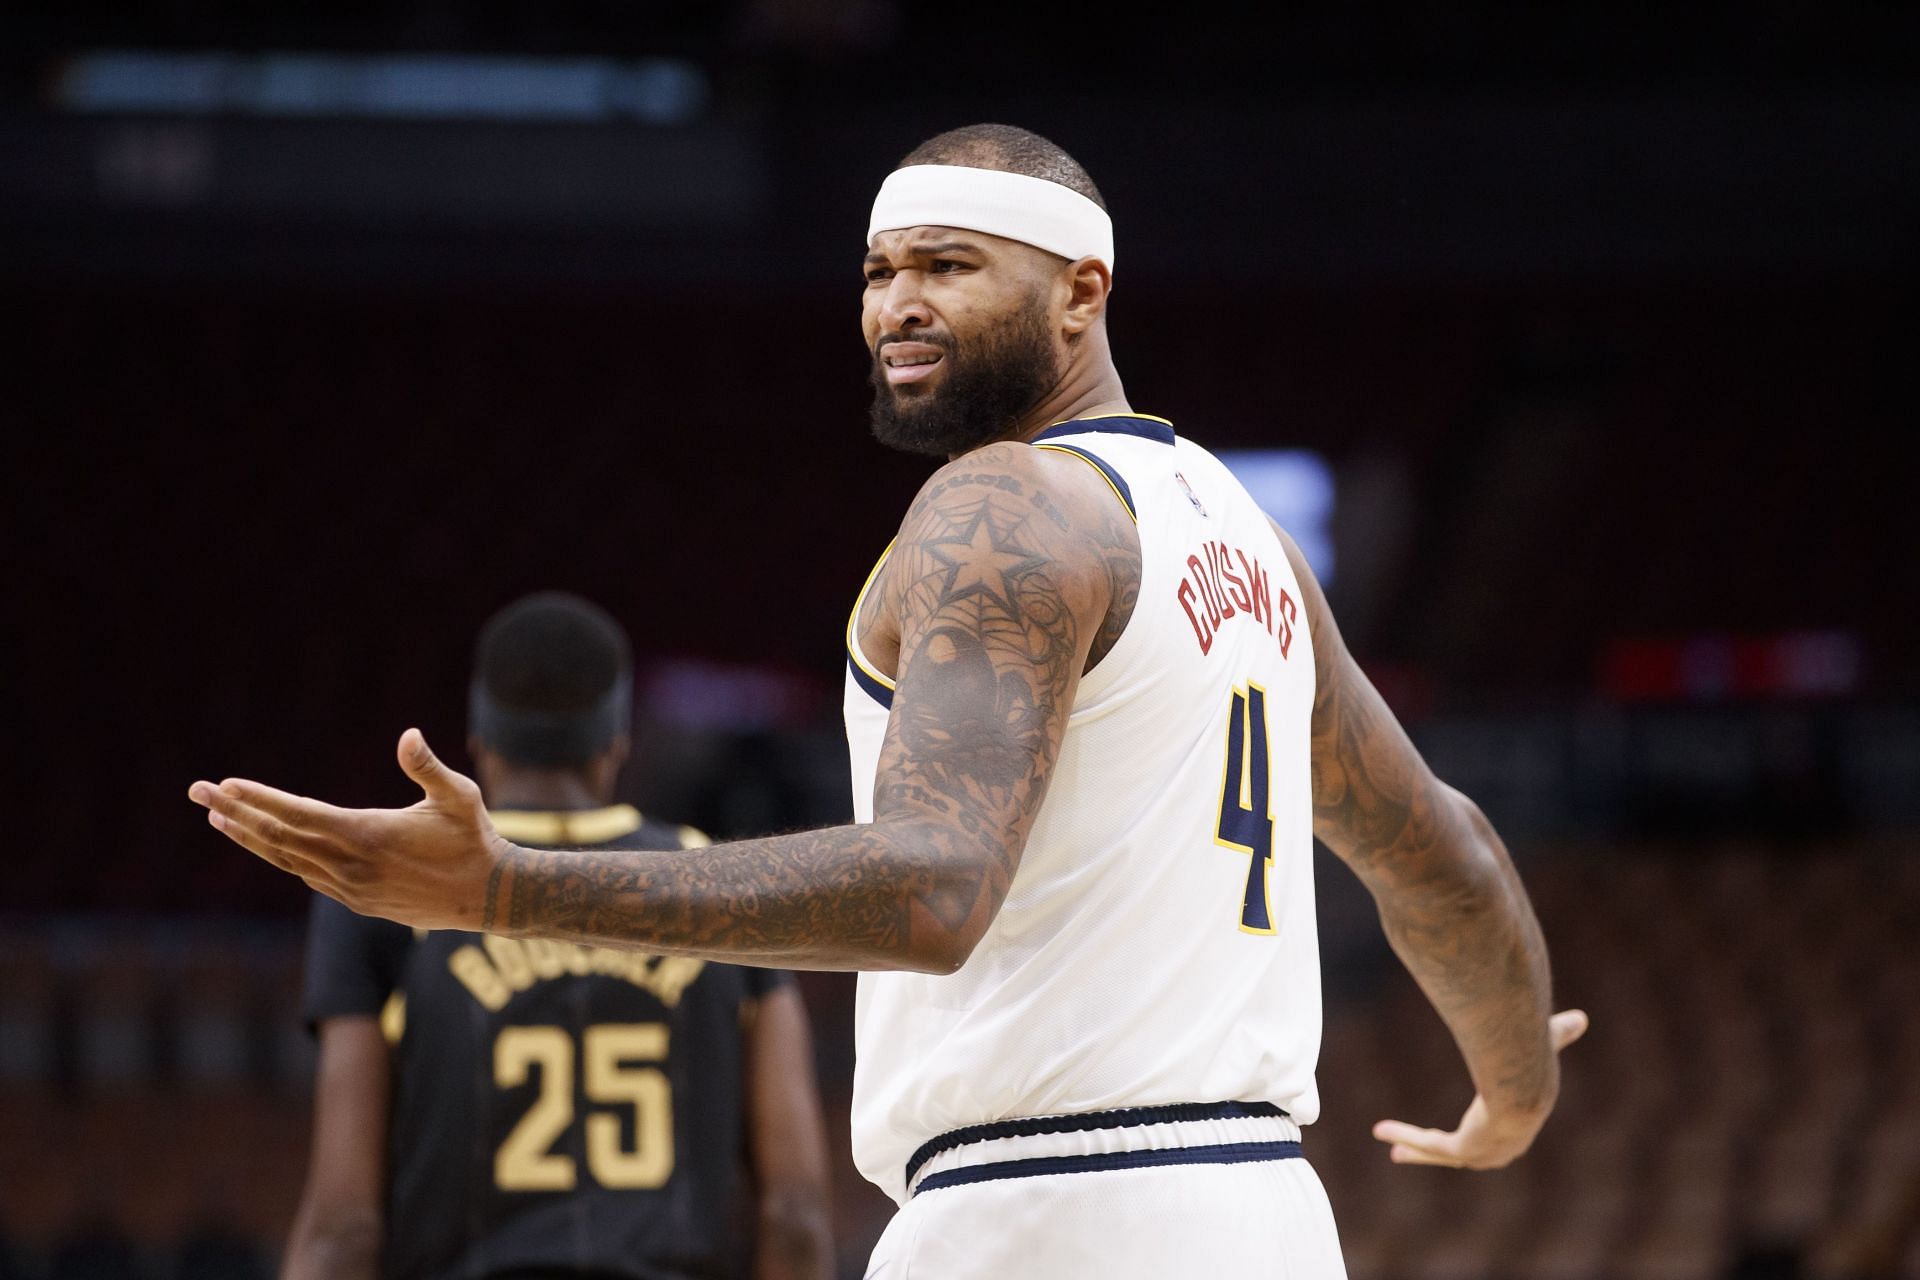 DeMarcus Cousins last played for the Denver Nuggets